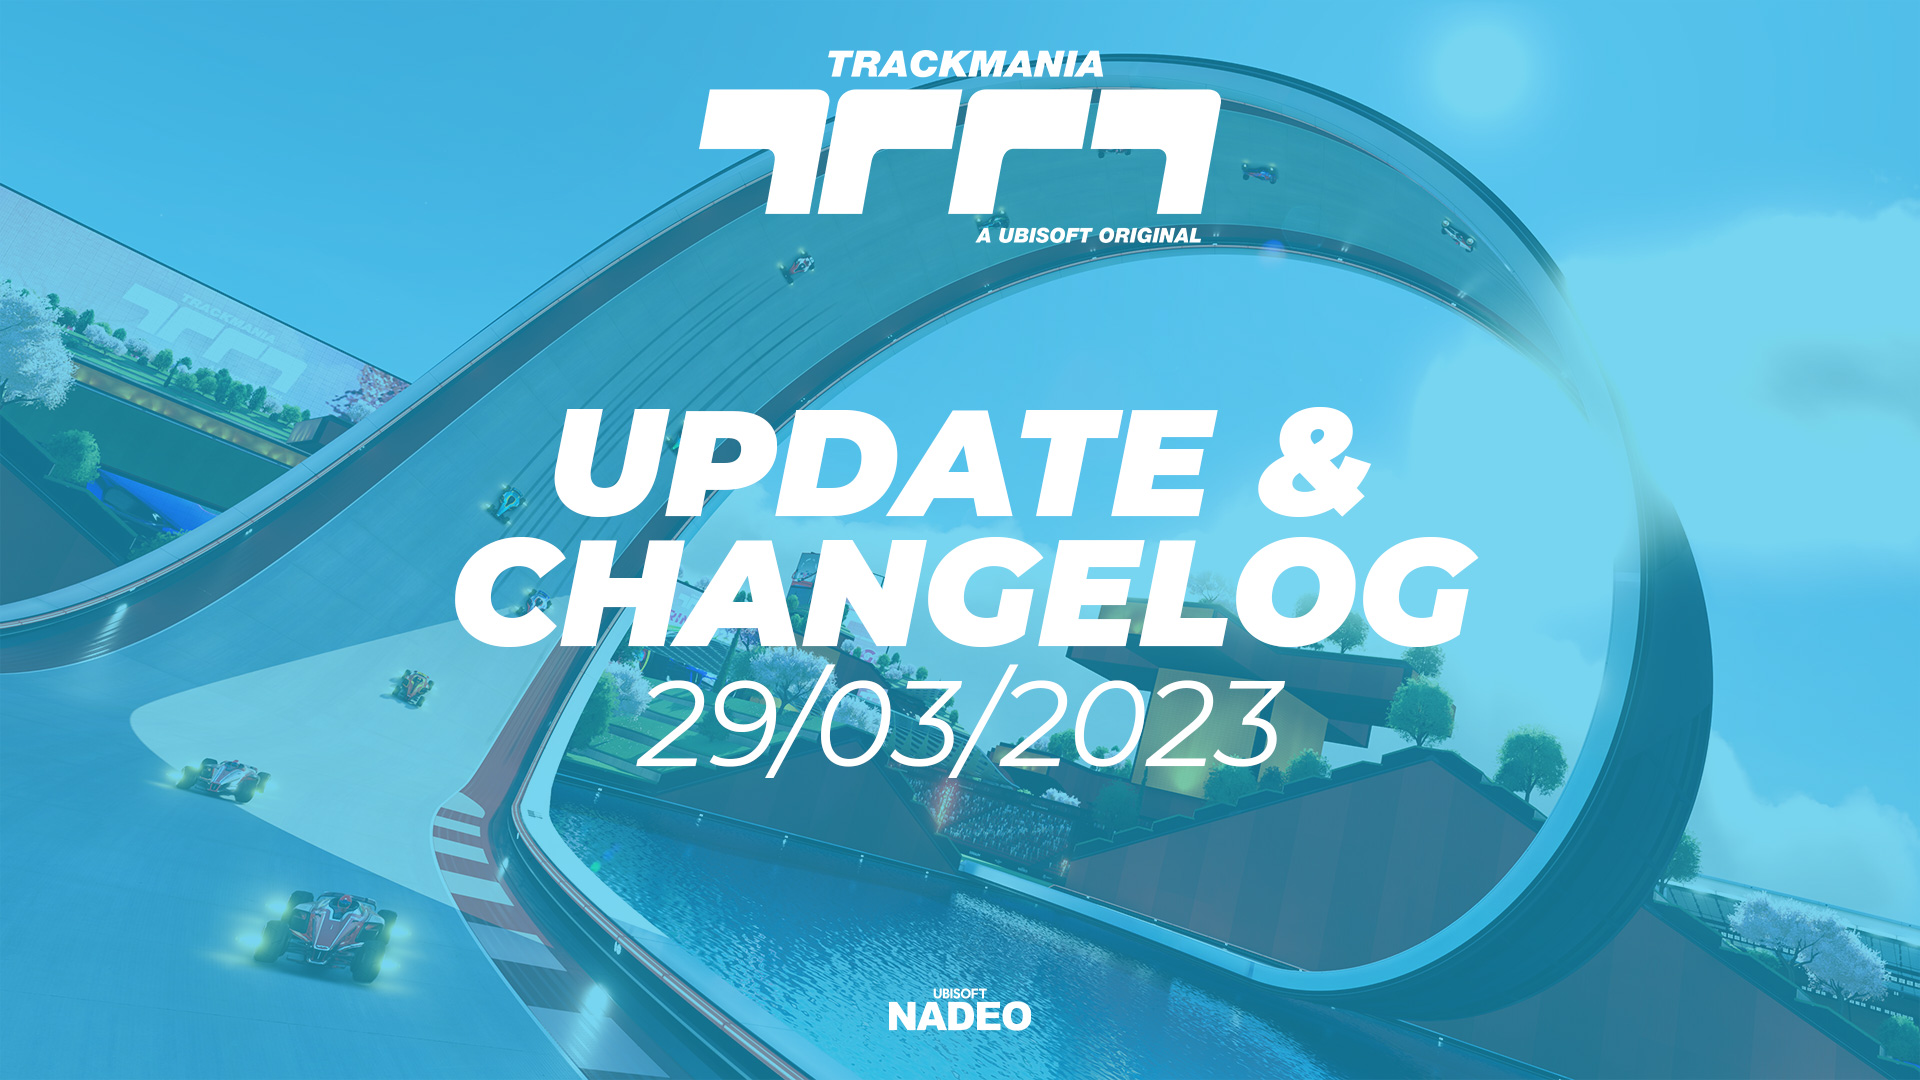 Trackmania update & changelog – March 29th 2023